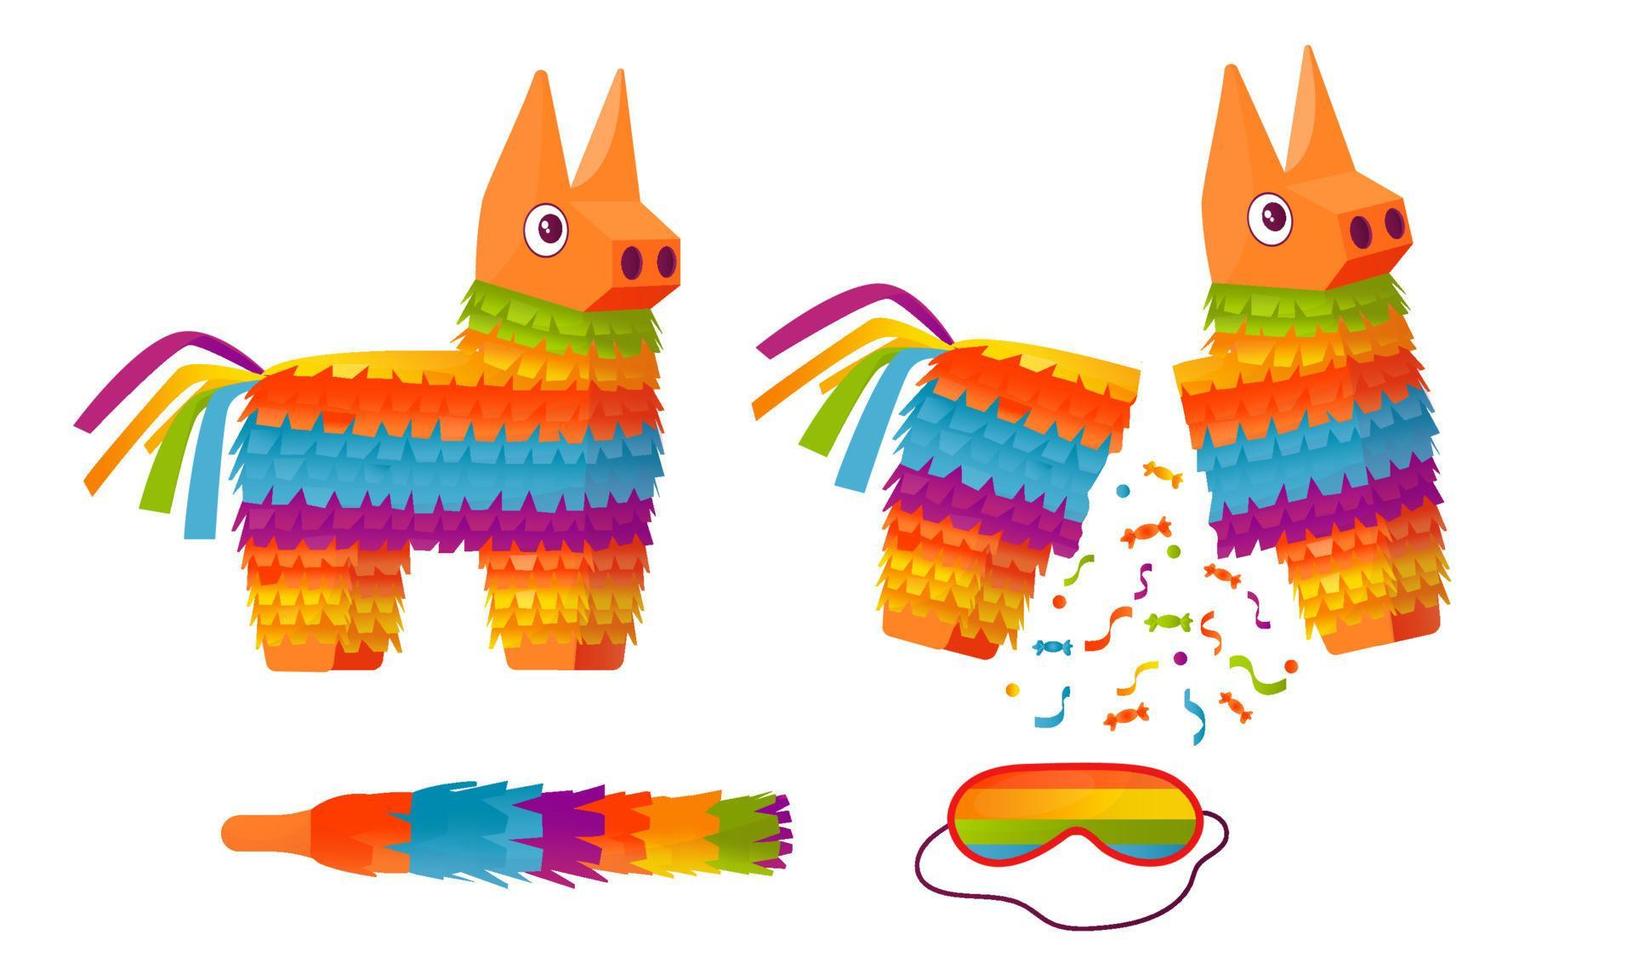 Pinata for a birthday. Corrugated paper toy with sweets or a surprise inside. Vector cartoon illustration